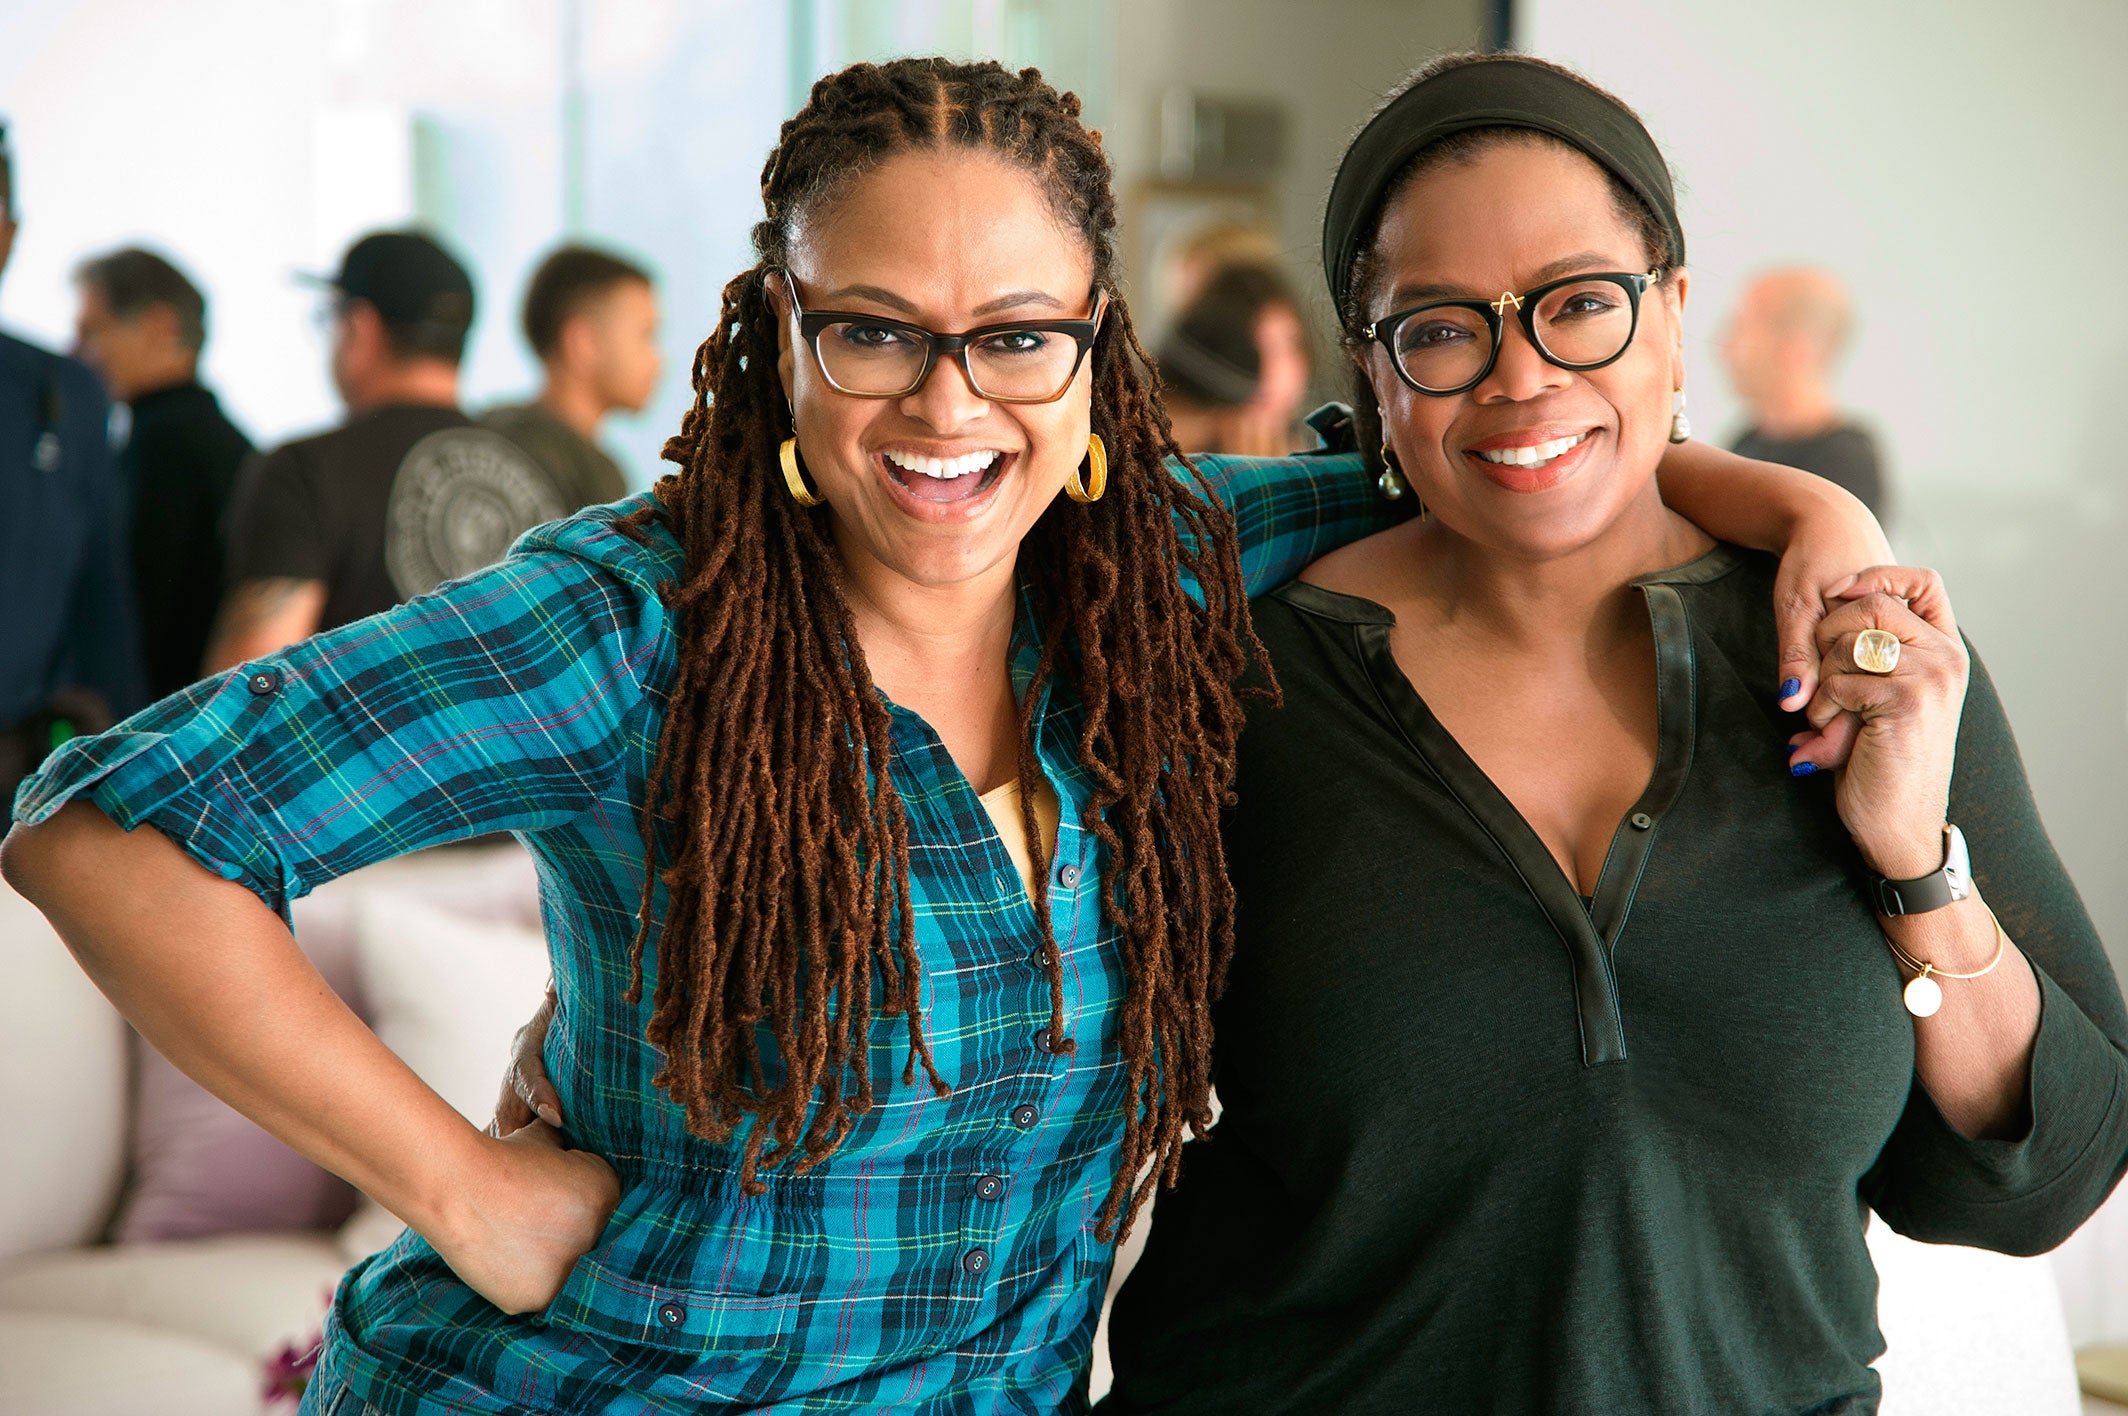 How Ava Duvernay and Oprah Winfrey's Friendship Led to 'Queen Sugar'
